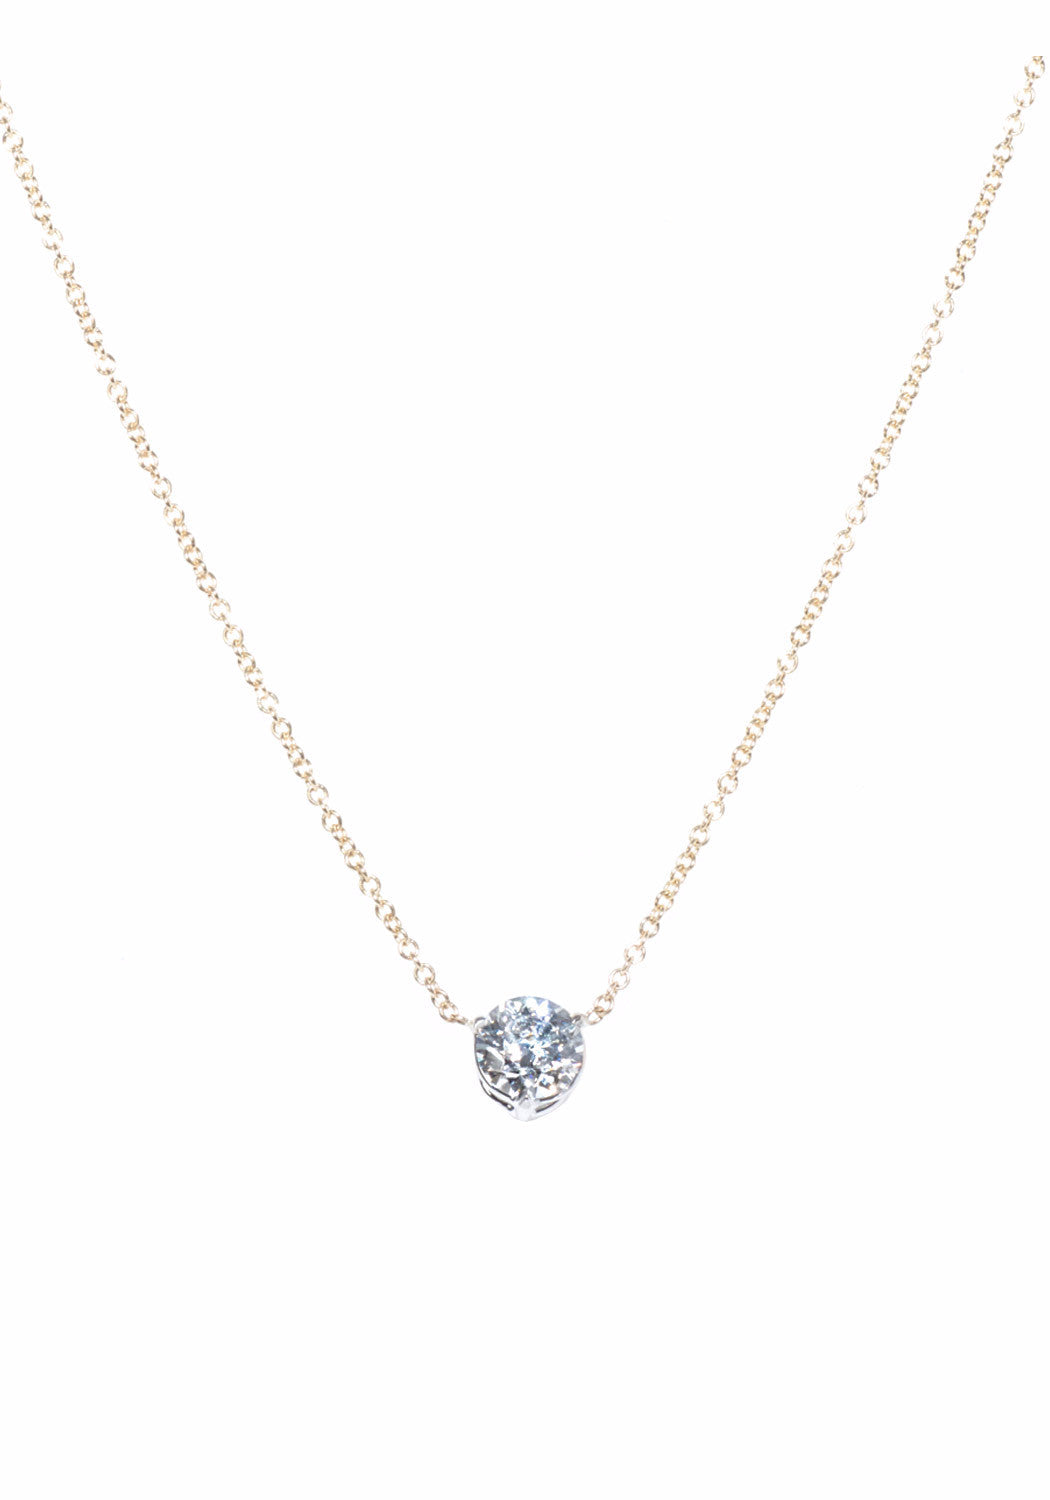 Diamond Pendant With Yellow Gold Chain | Oster Jewelers 